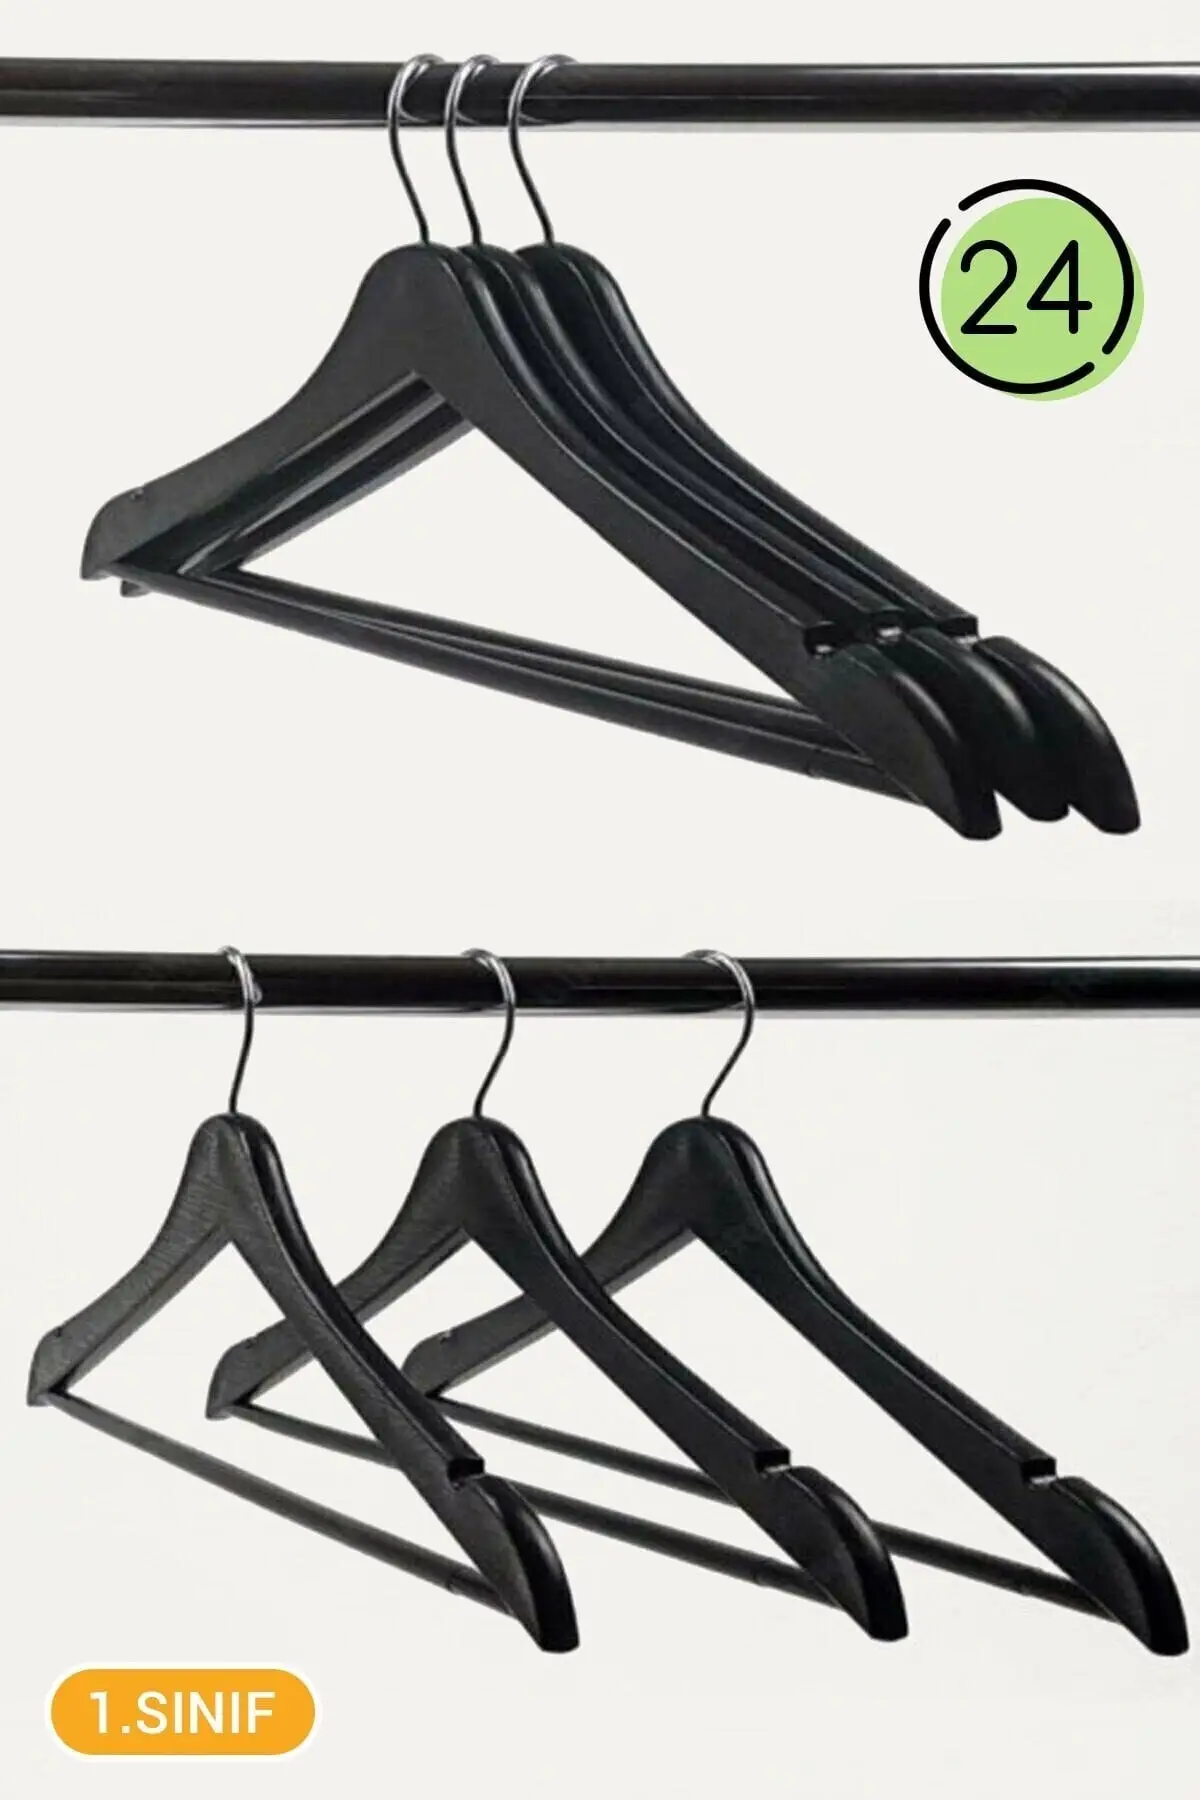 

24 Pcs Wooden Looking Strap Clothes Hanger Plastic 12 Black Storage & Editing Products Houseware & Furniture